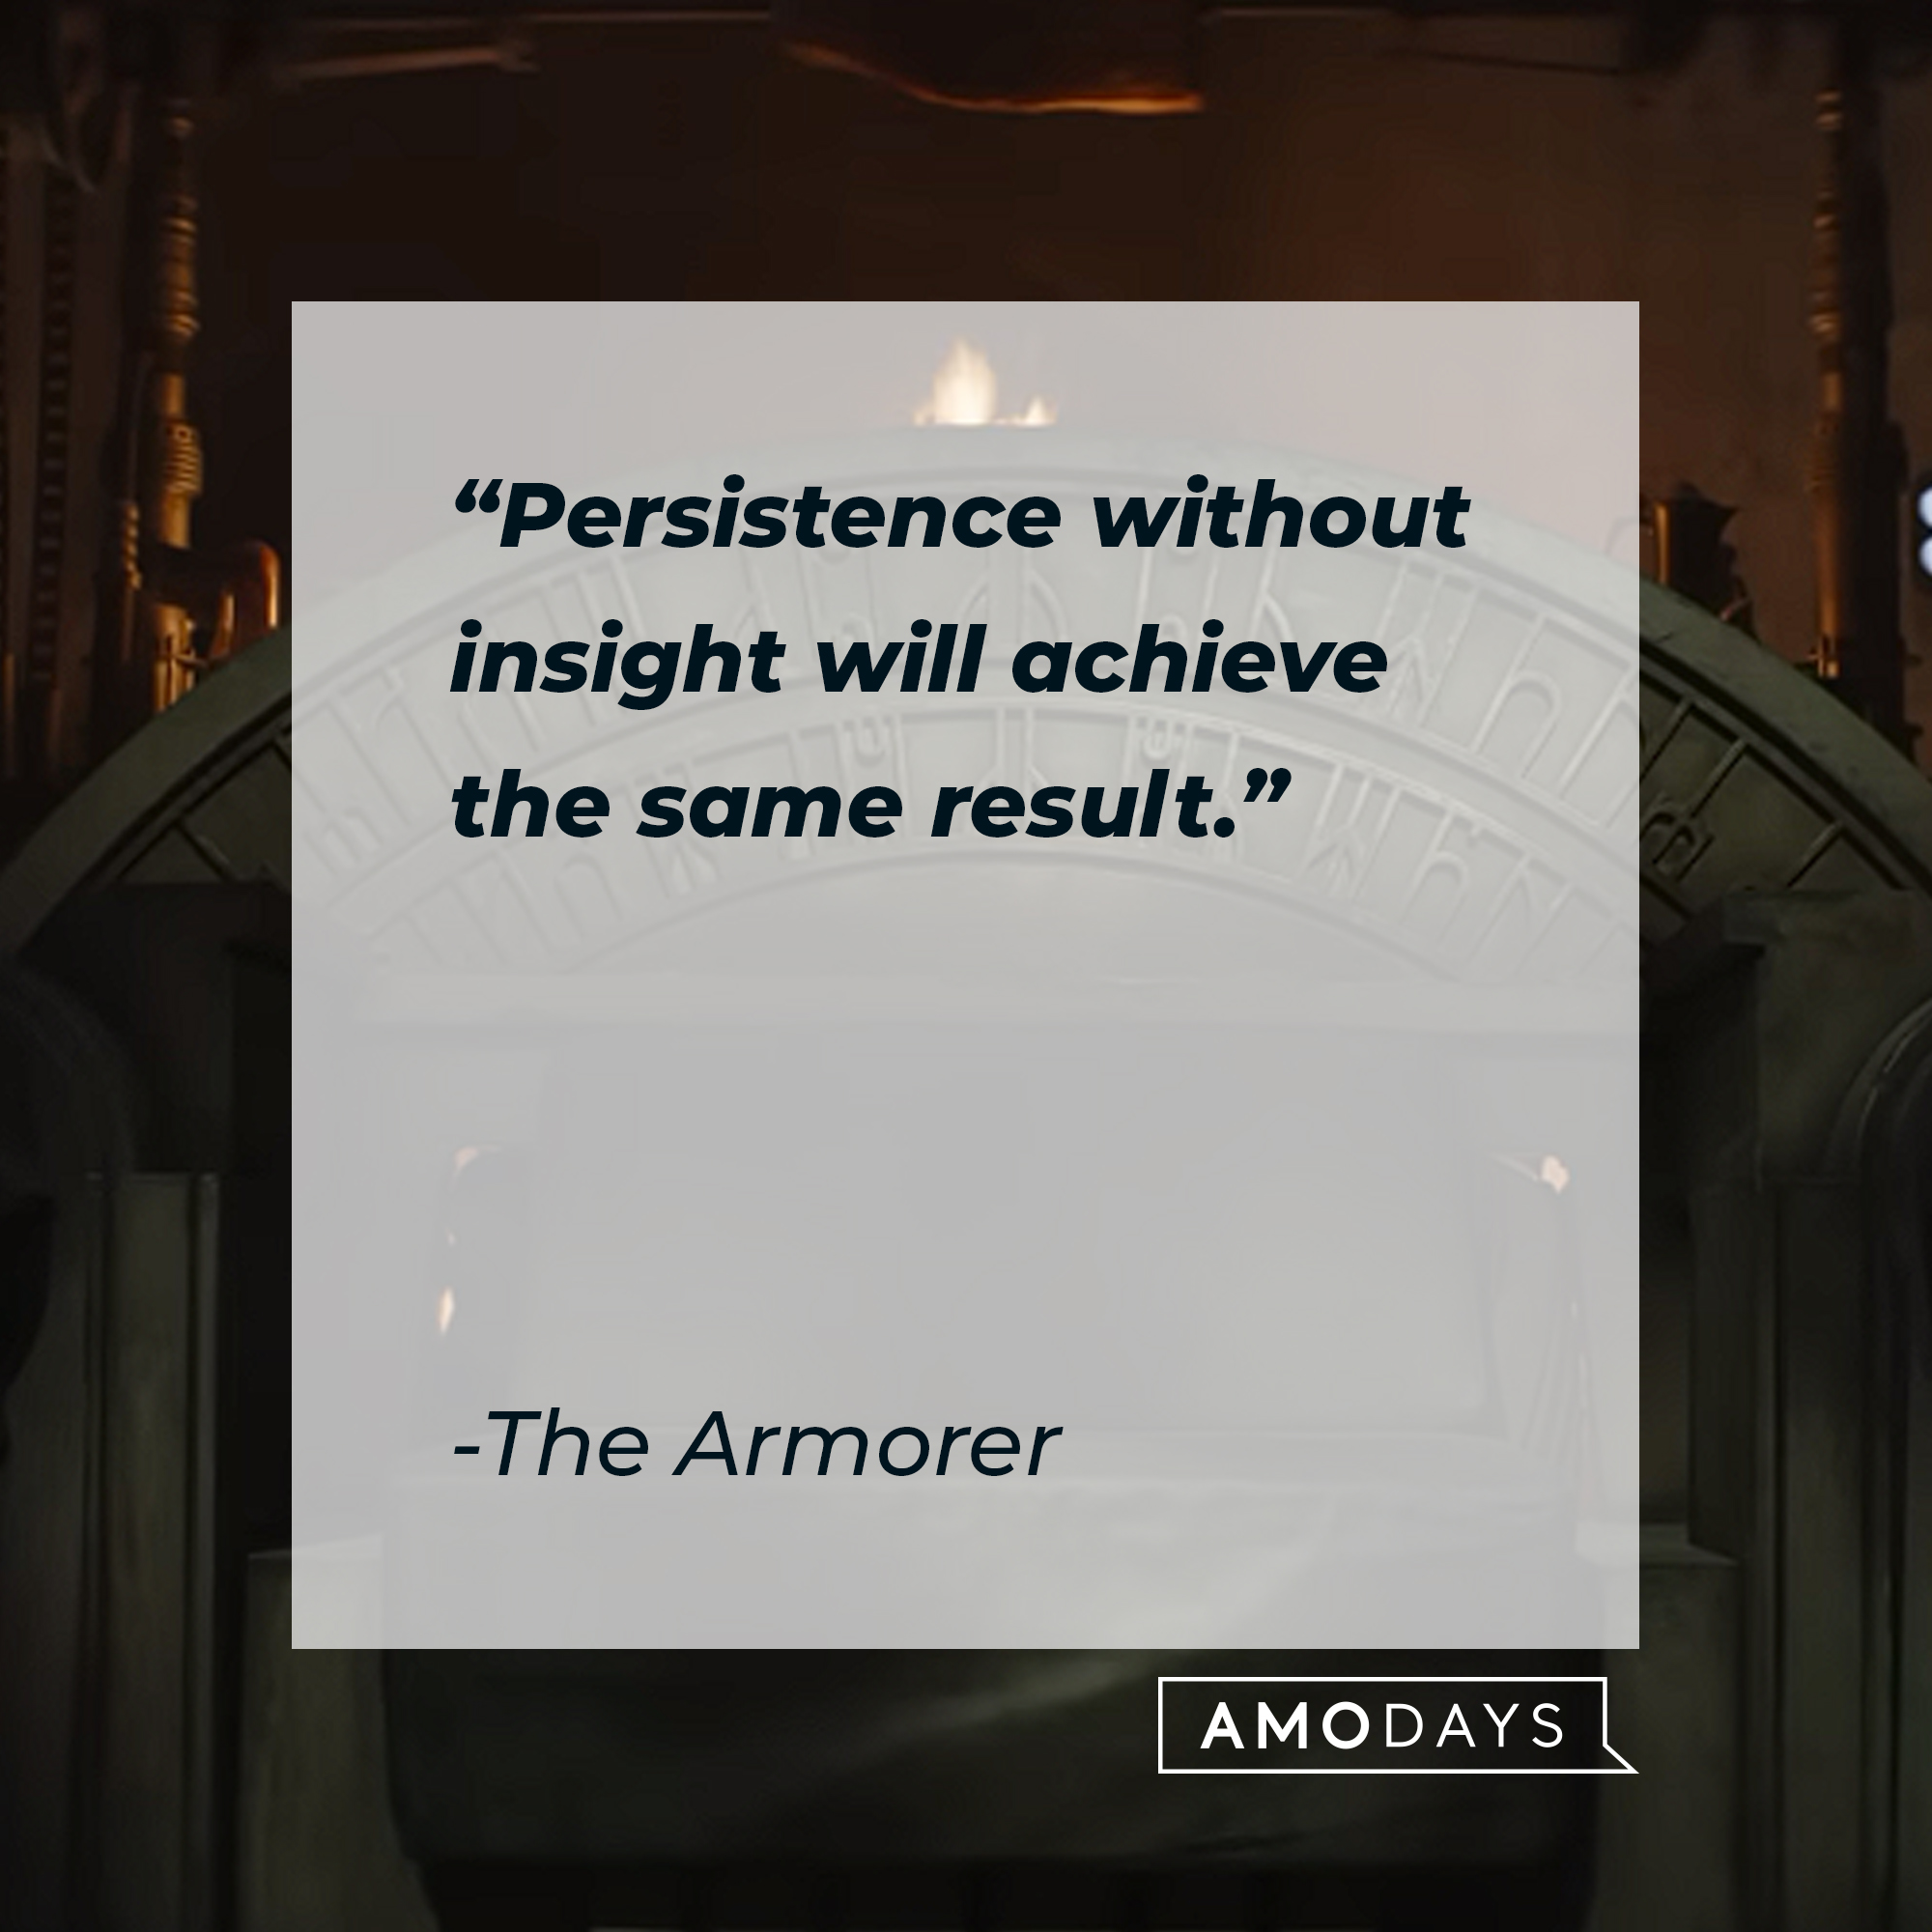 The Armorer's quote: "Persistence without insight will achieve the same result." | Source: youtube.com/StarWars